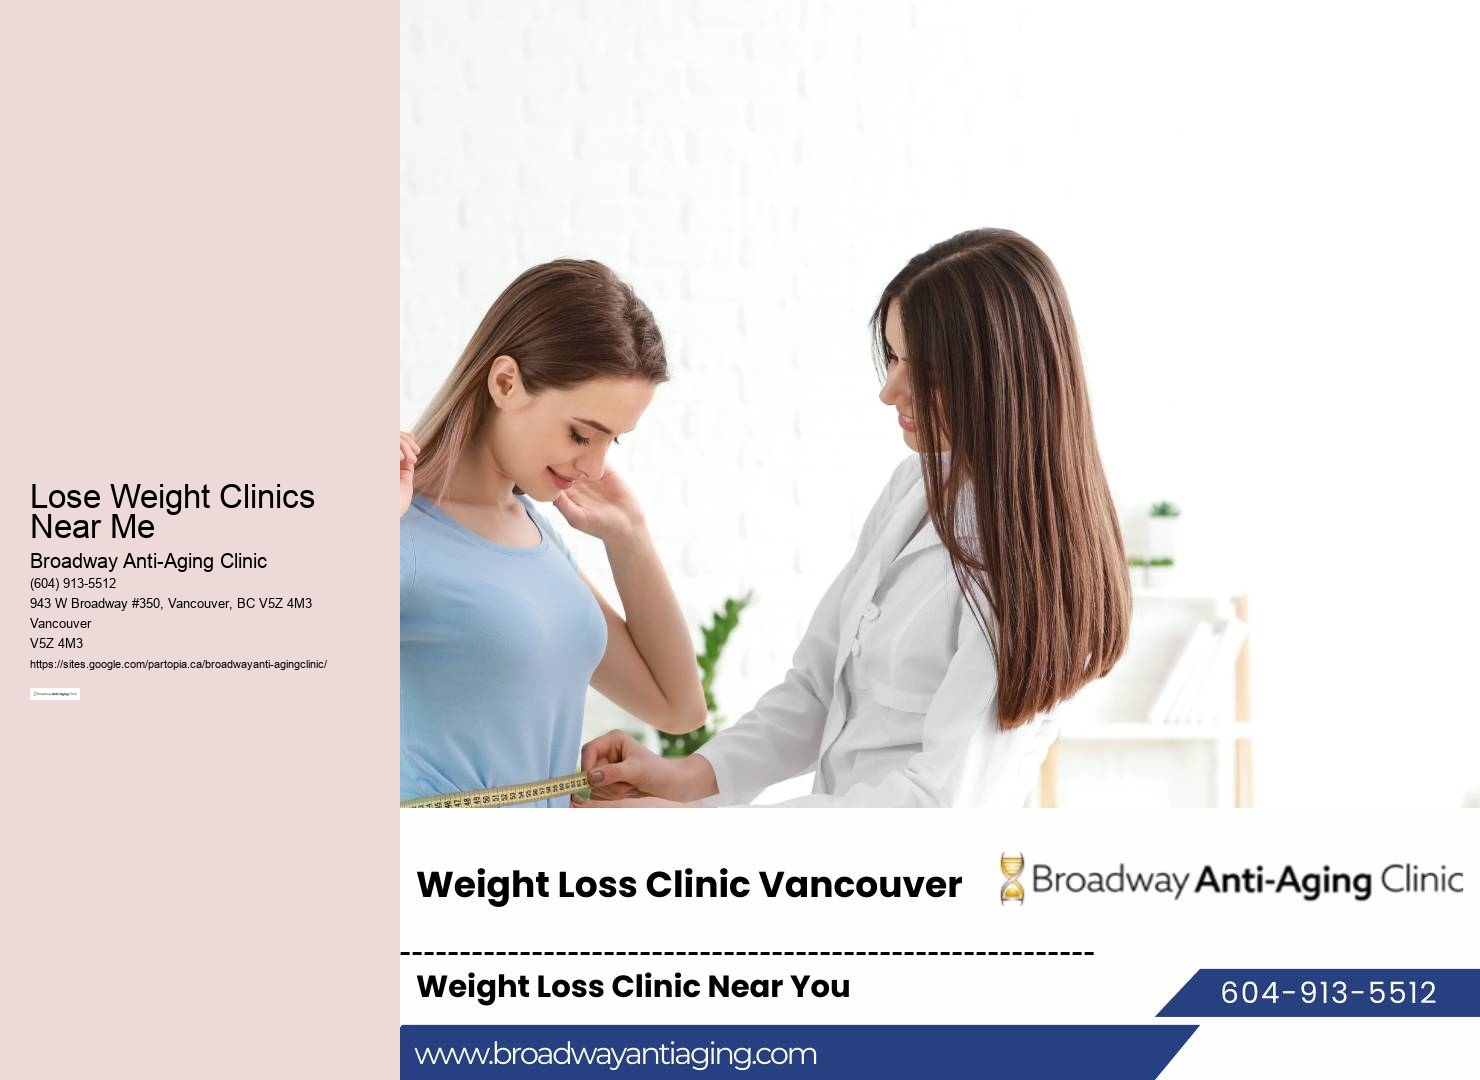 Lose Weight Clinics Near Me